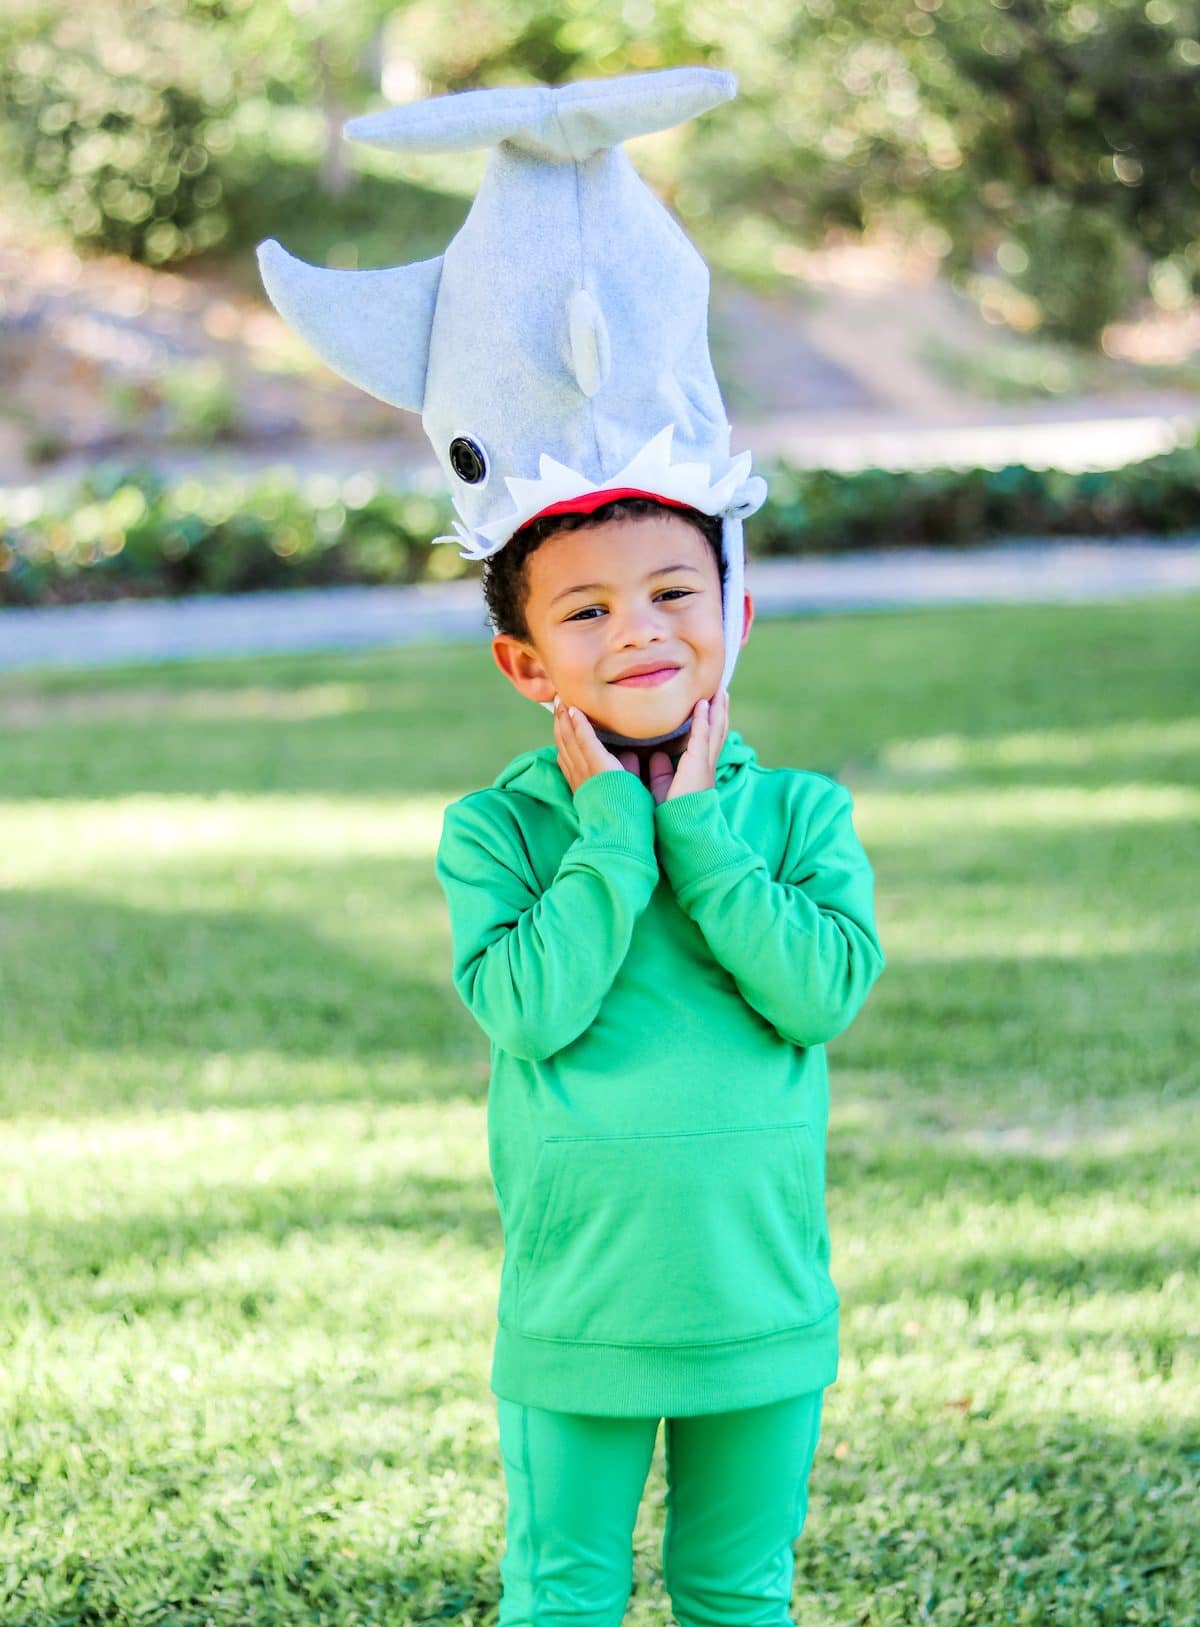 Diy Halloween Costumes With Primary